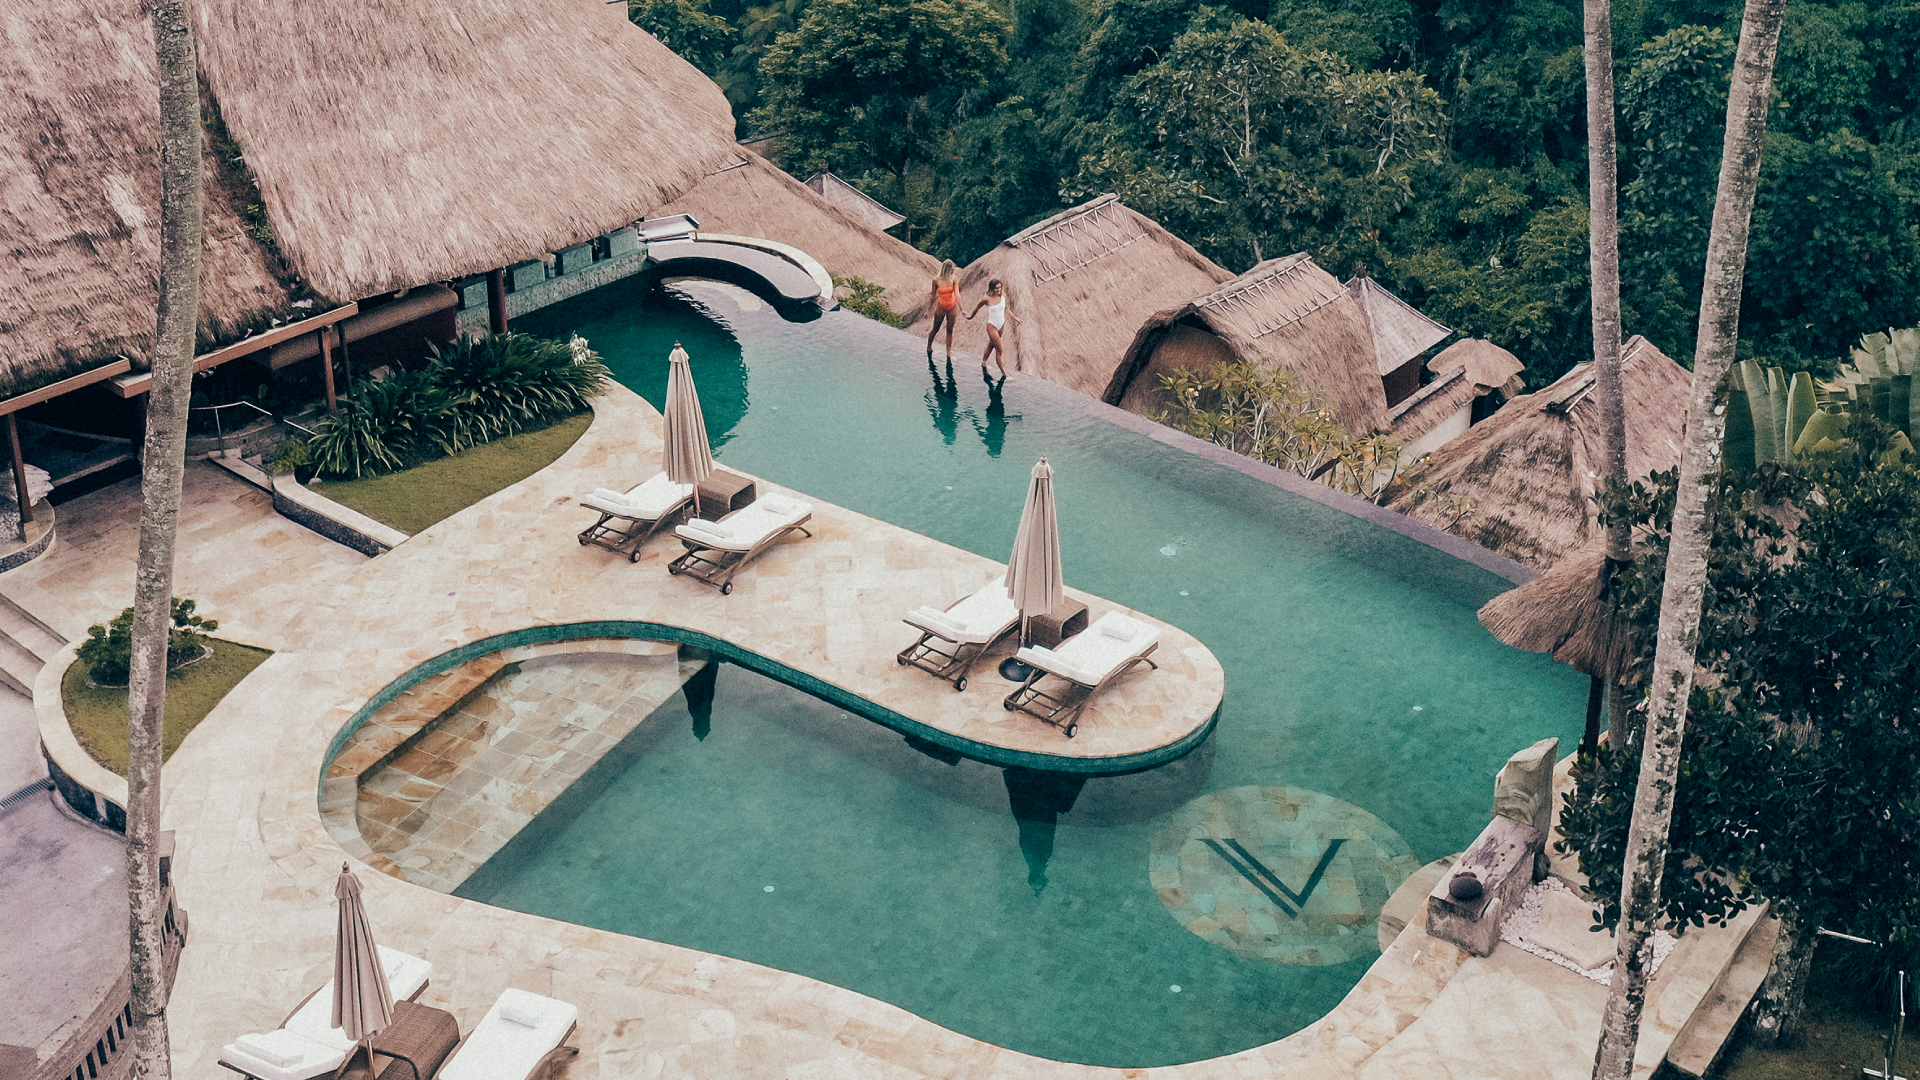 Viceroy Bali Main Pool Aerial View March 2021